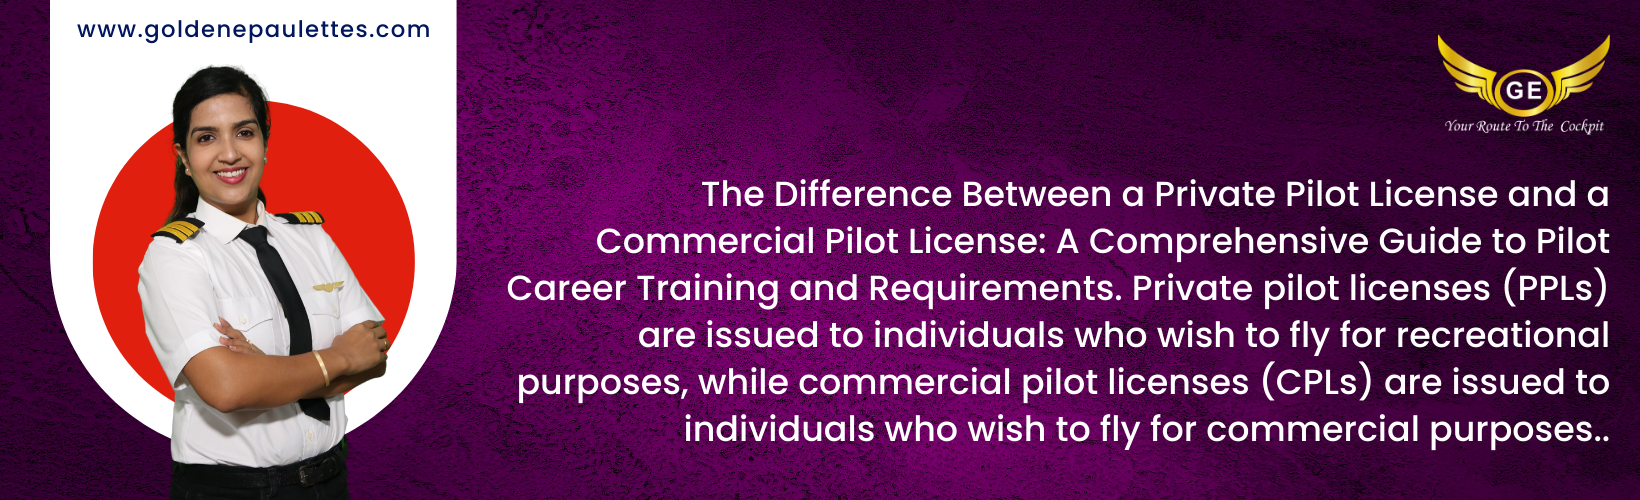 What is the Difference Between a Private Pilot License and a Commercial Pilot License